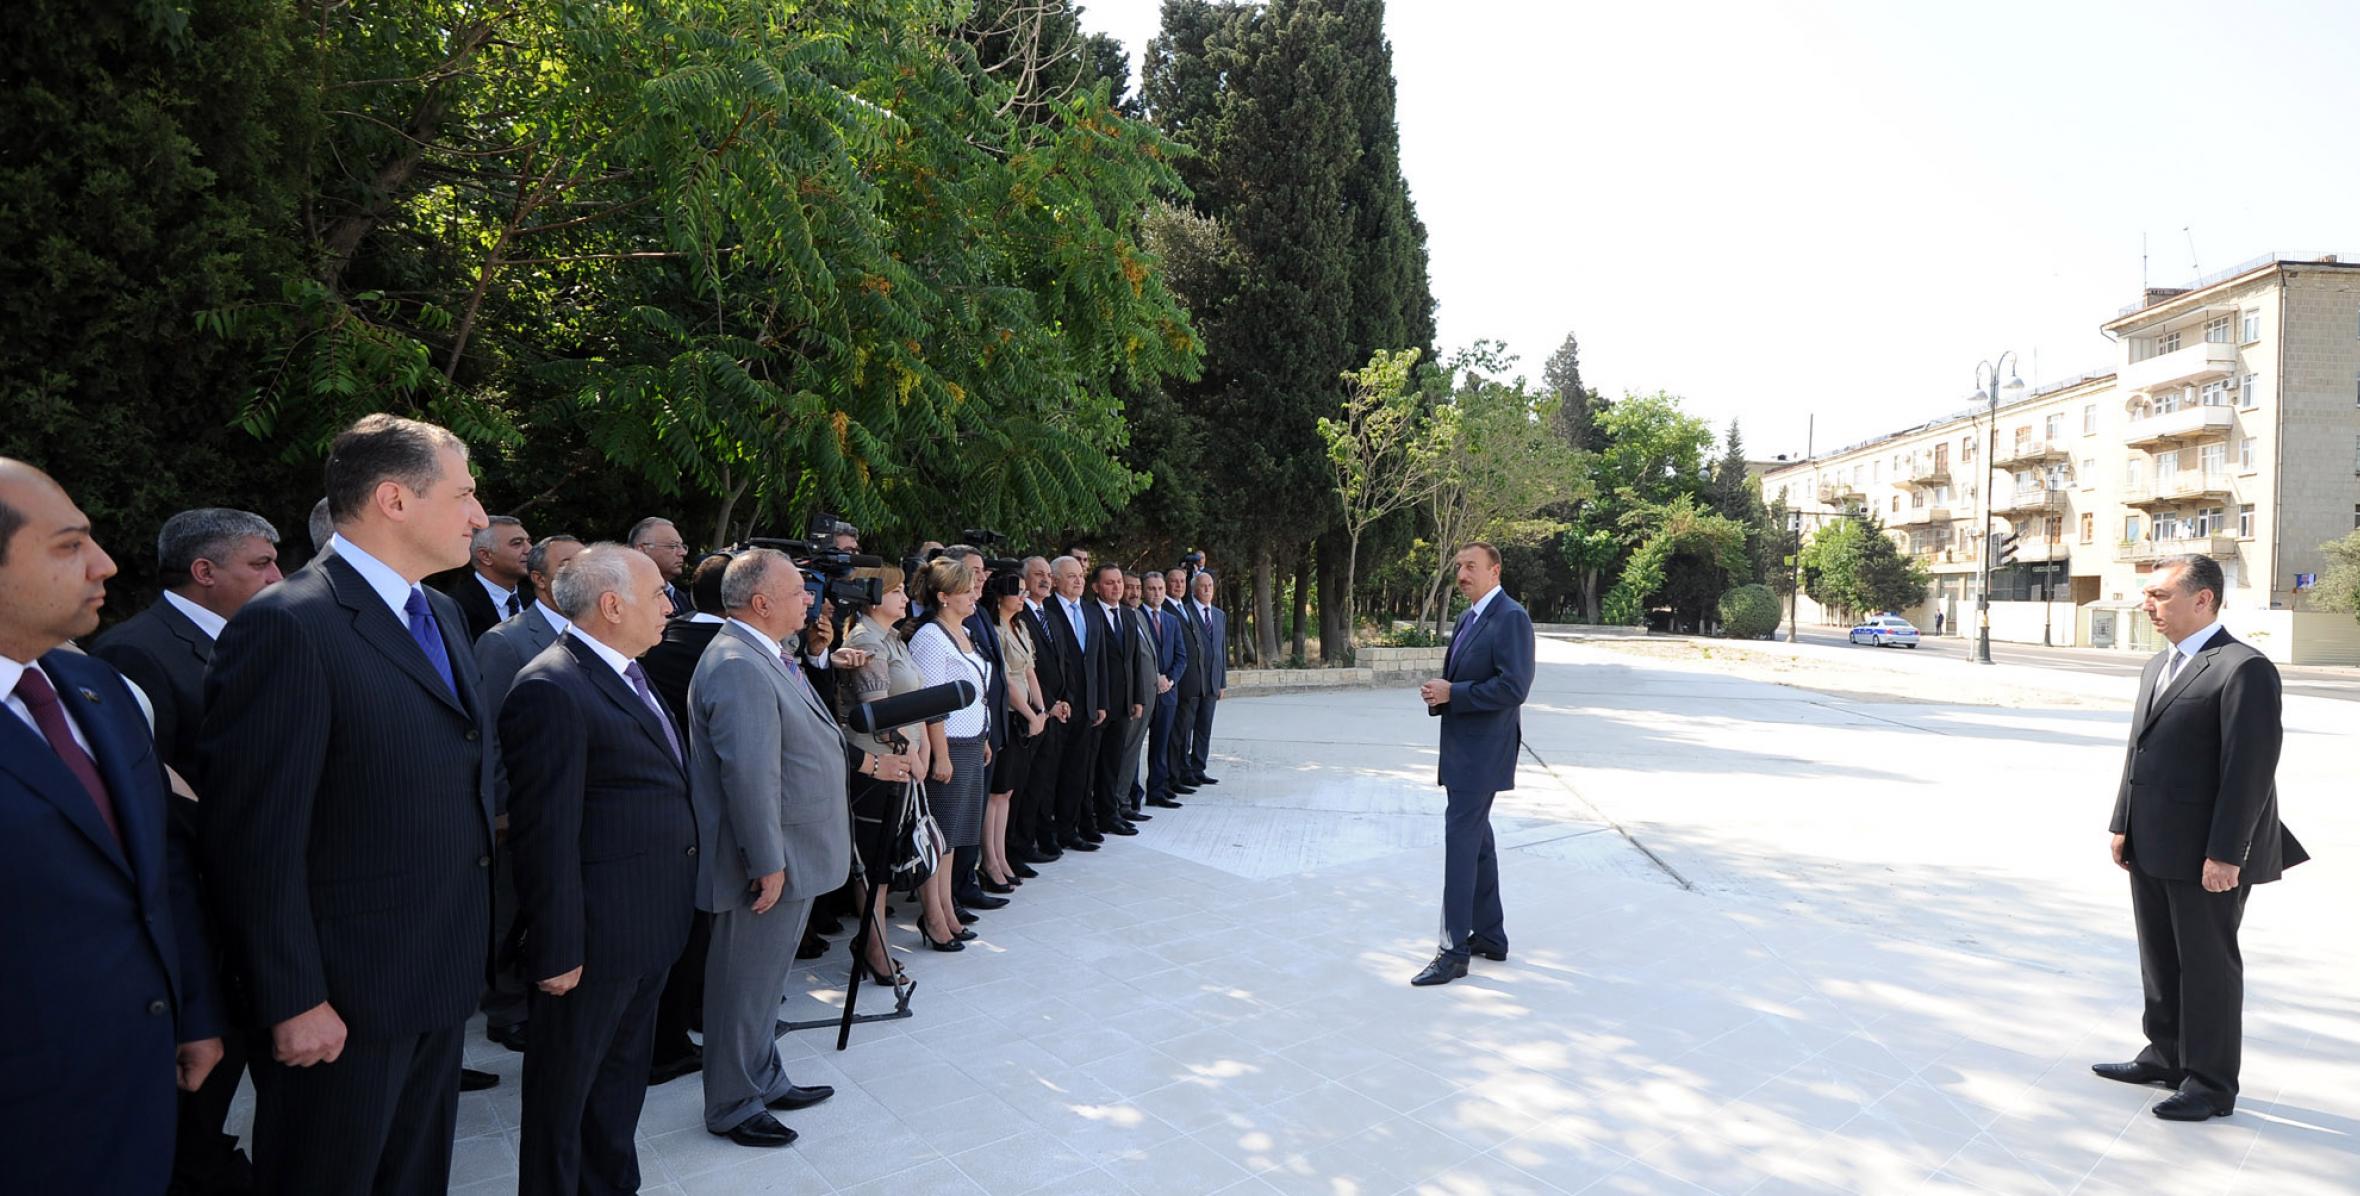 Ilham Aliyev reviewed the progress of major overhaul and landscaping at the Sumgayit seaside culture and recreation park named after Nasimi